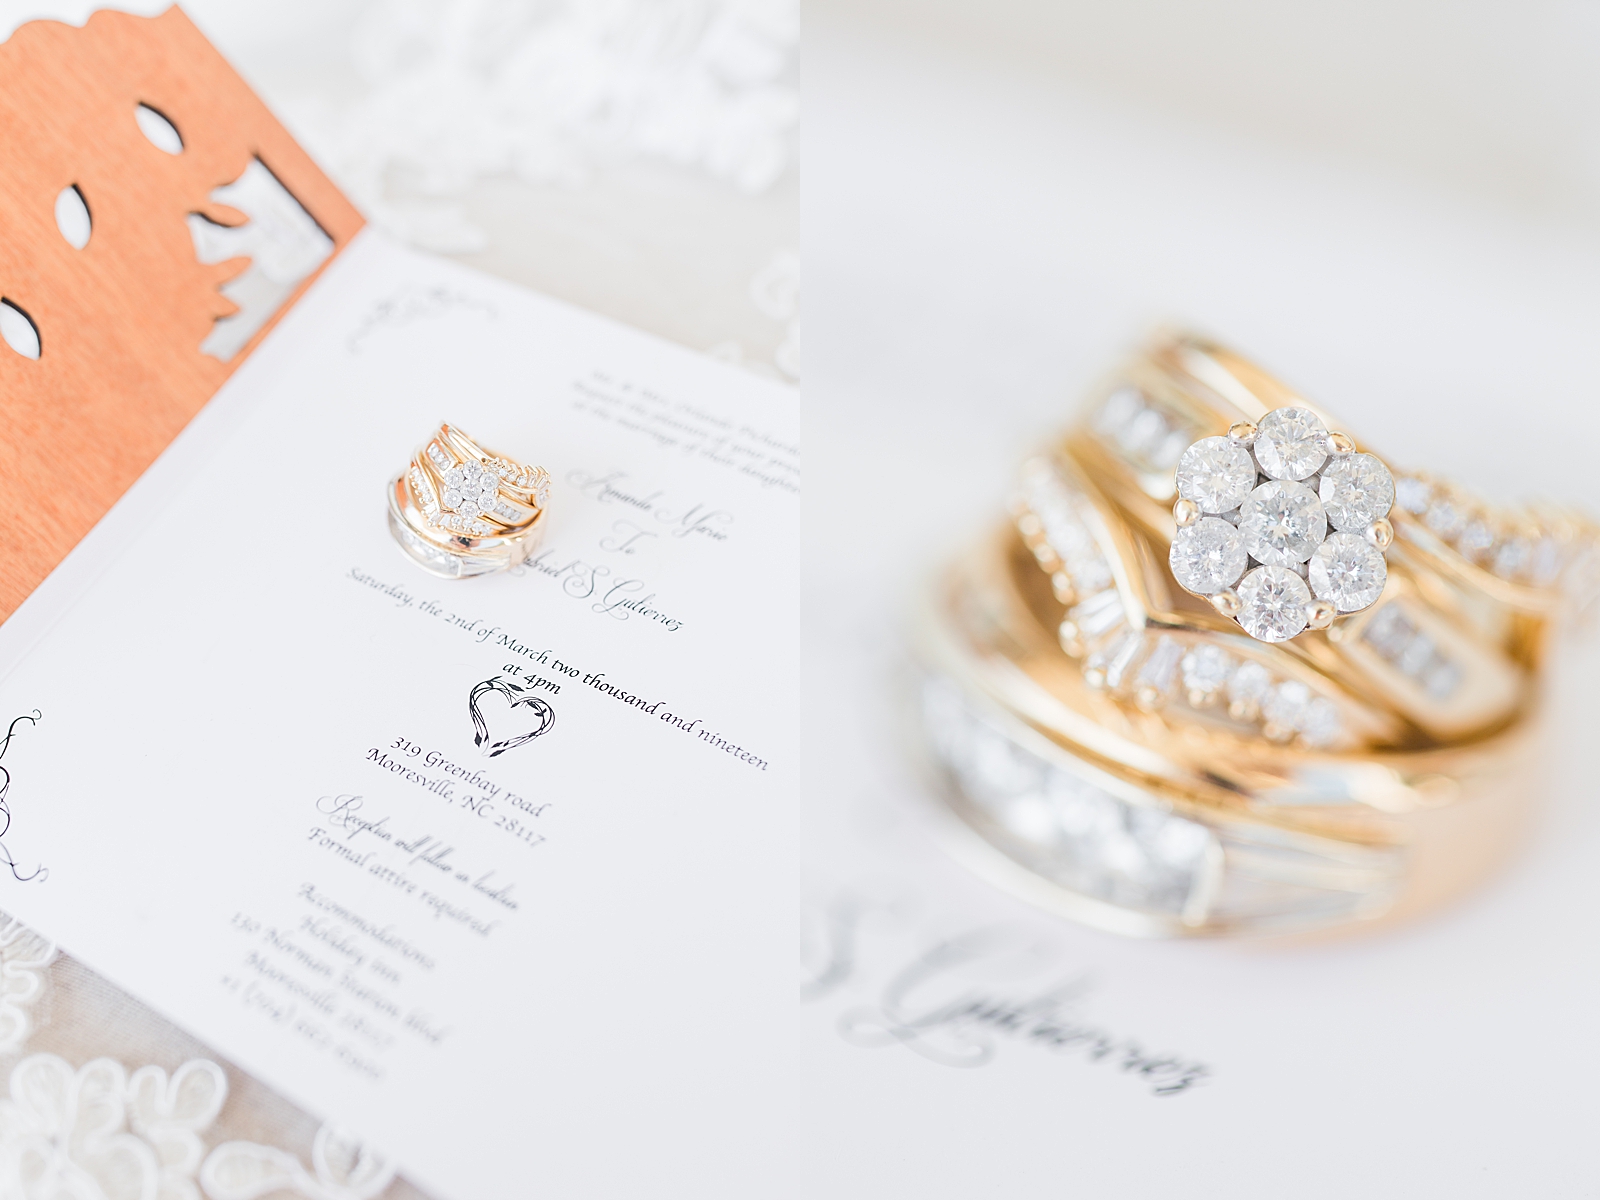 Mooresville Wedding Invitation and detail of wedding rings Photos